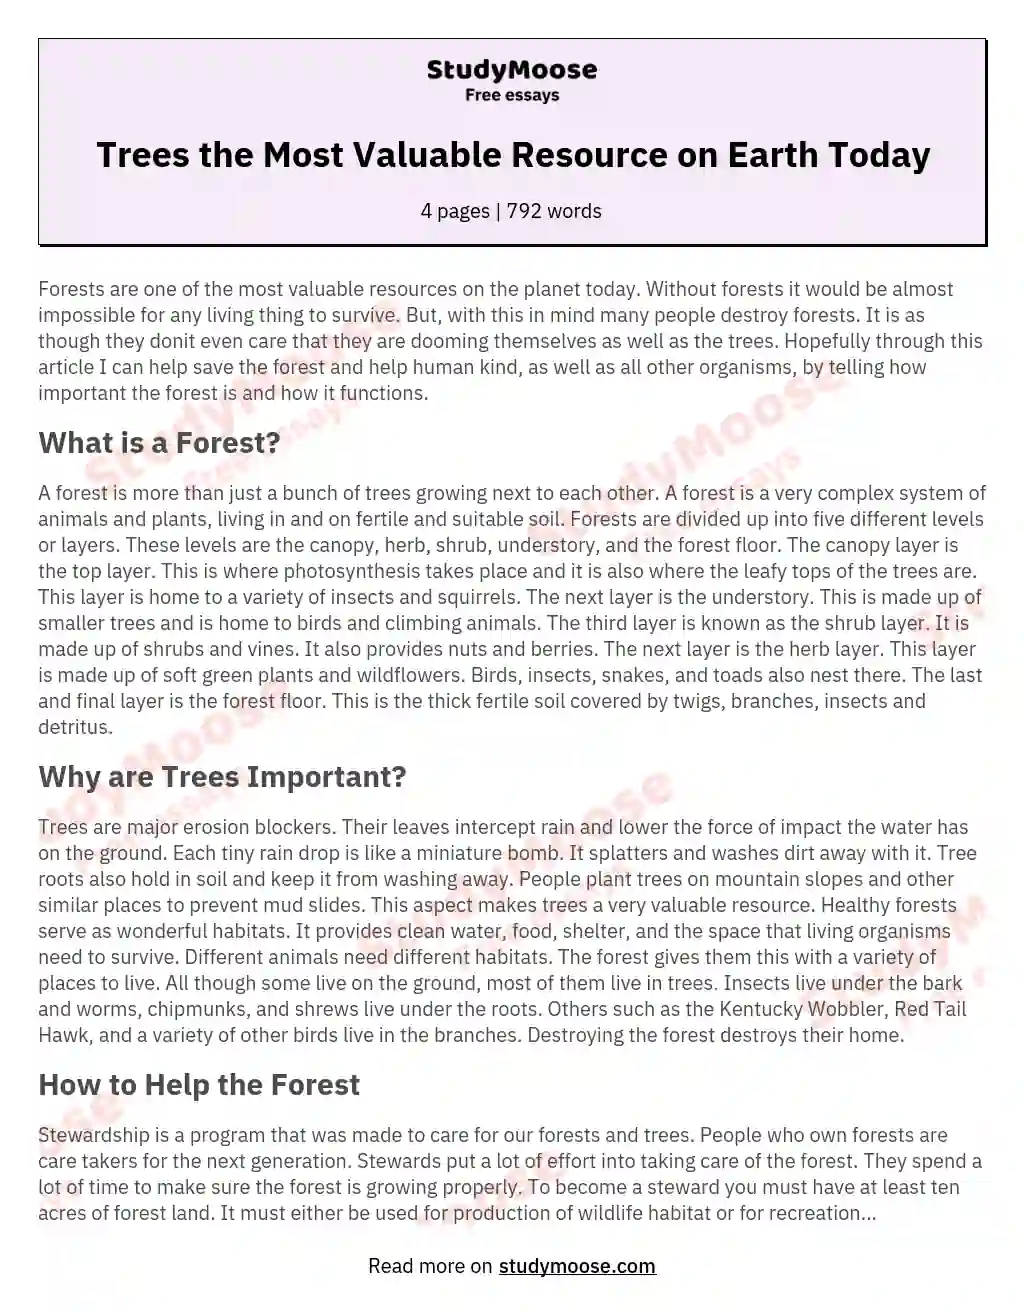 Trees the Most Valuable Resource on Earth Today essay